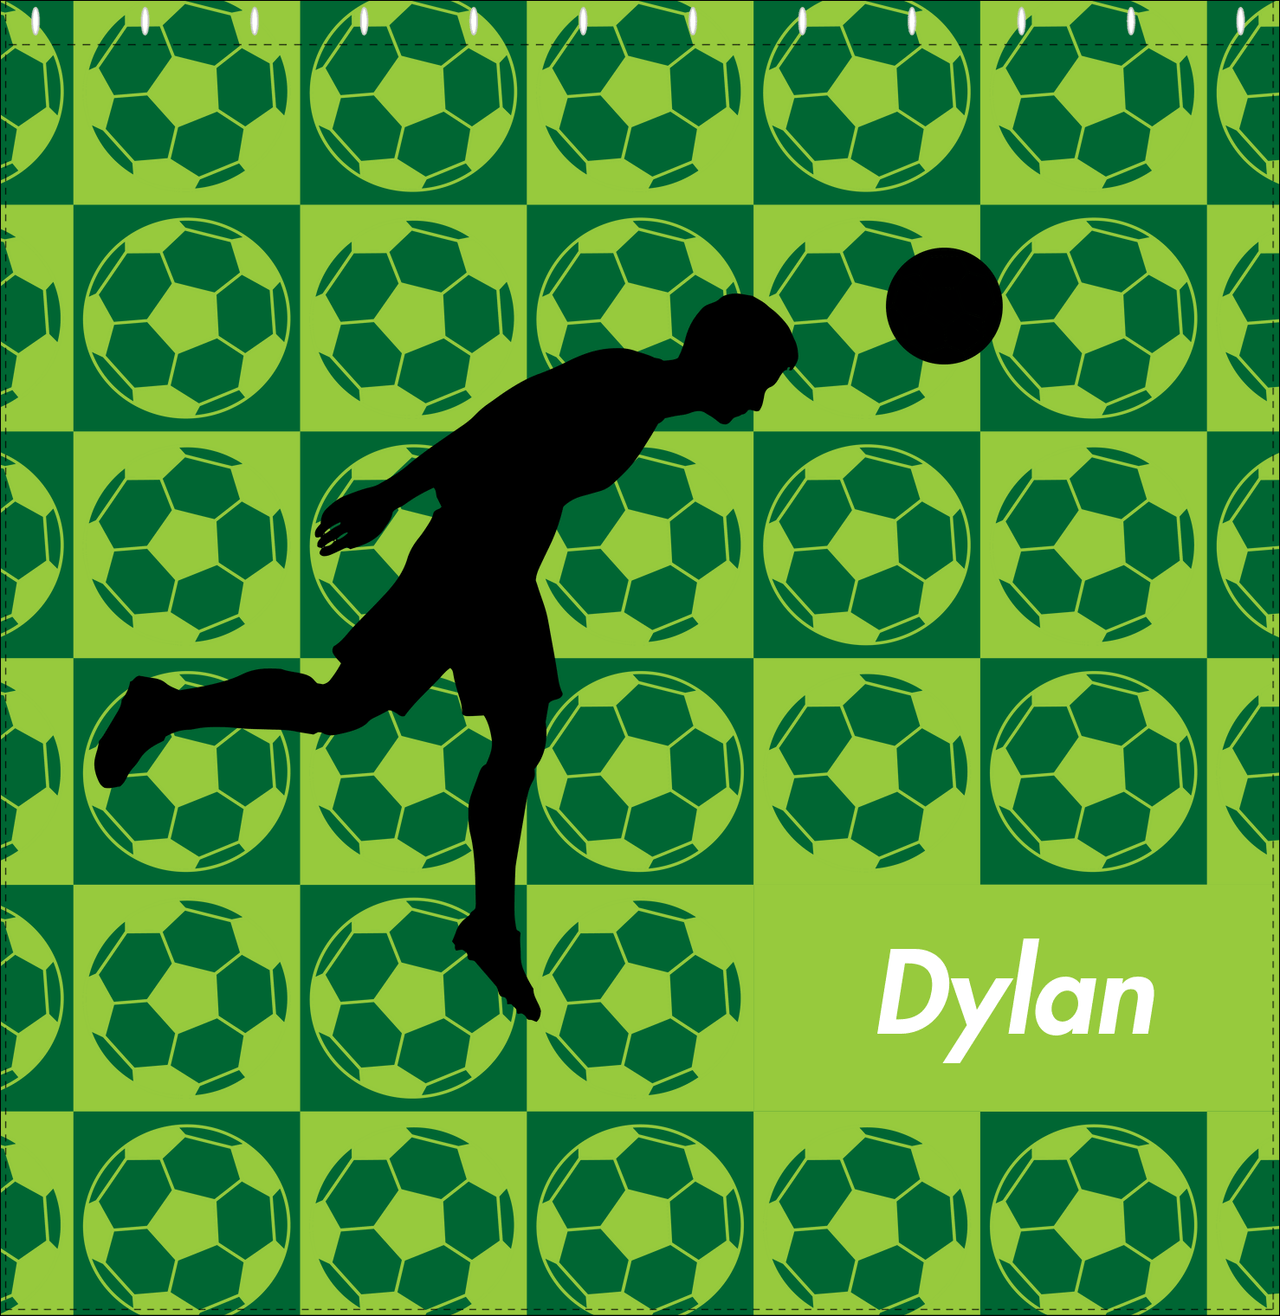 Personalized Soccer Shower Curtain XLVI - Green Background - Boy Silhouette VI - Decorate View